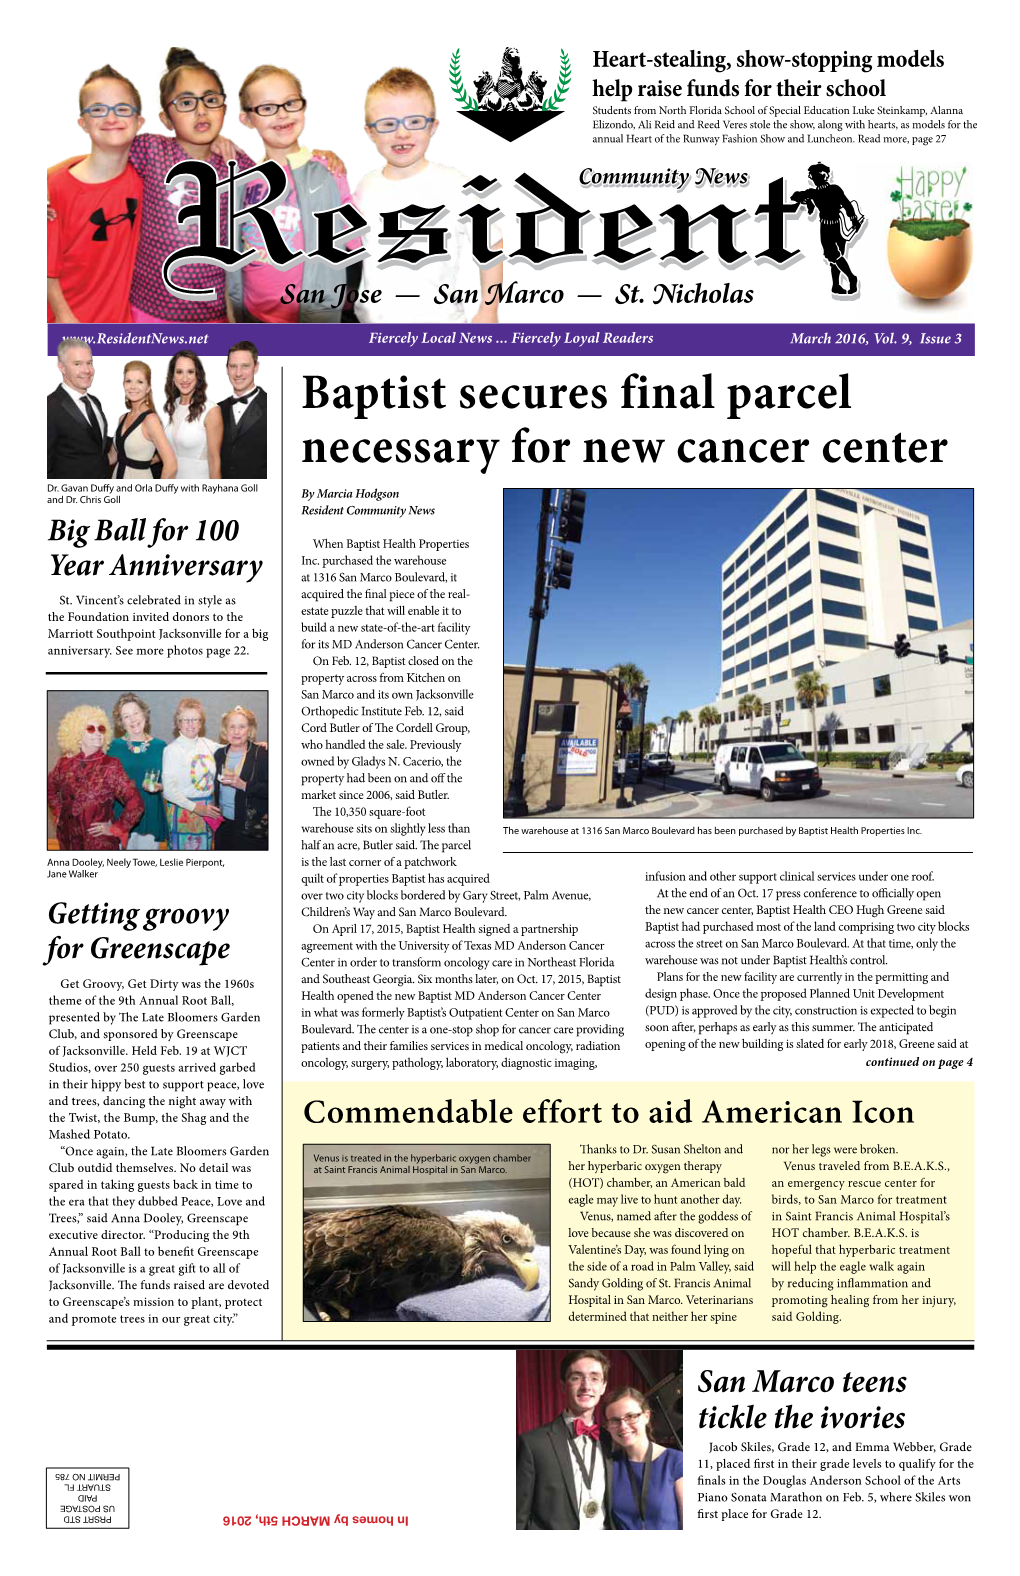 Baptist Secures Final Parcel Necessary for New Cancer Center